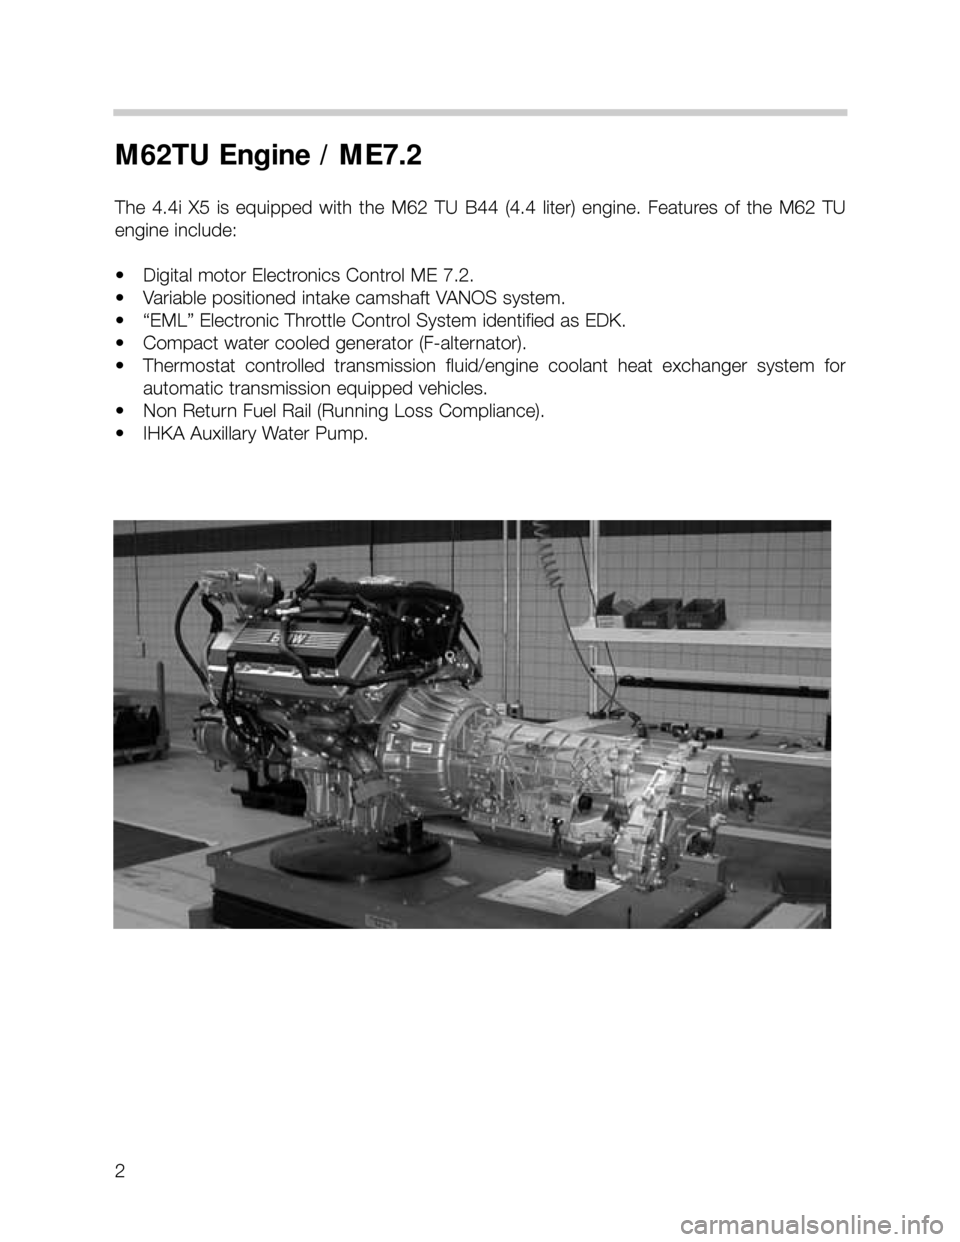 BMW X5 2003 E53 M62TU Engine Workshop Manual 2
M62TU Engine / ME7.2
The 4.4i X5 is equipped  with  the  M62  TU  B44  (4.4  liter)  engine.  Features  of  the  M62  TU
engine include:
• Digital motor Electronics Control ME 7.2.
• Variable po